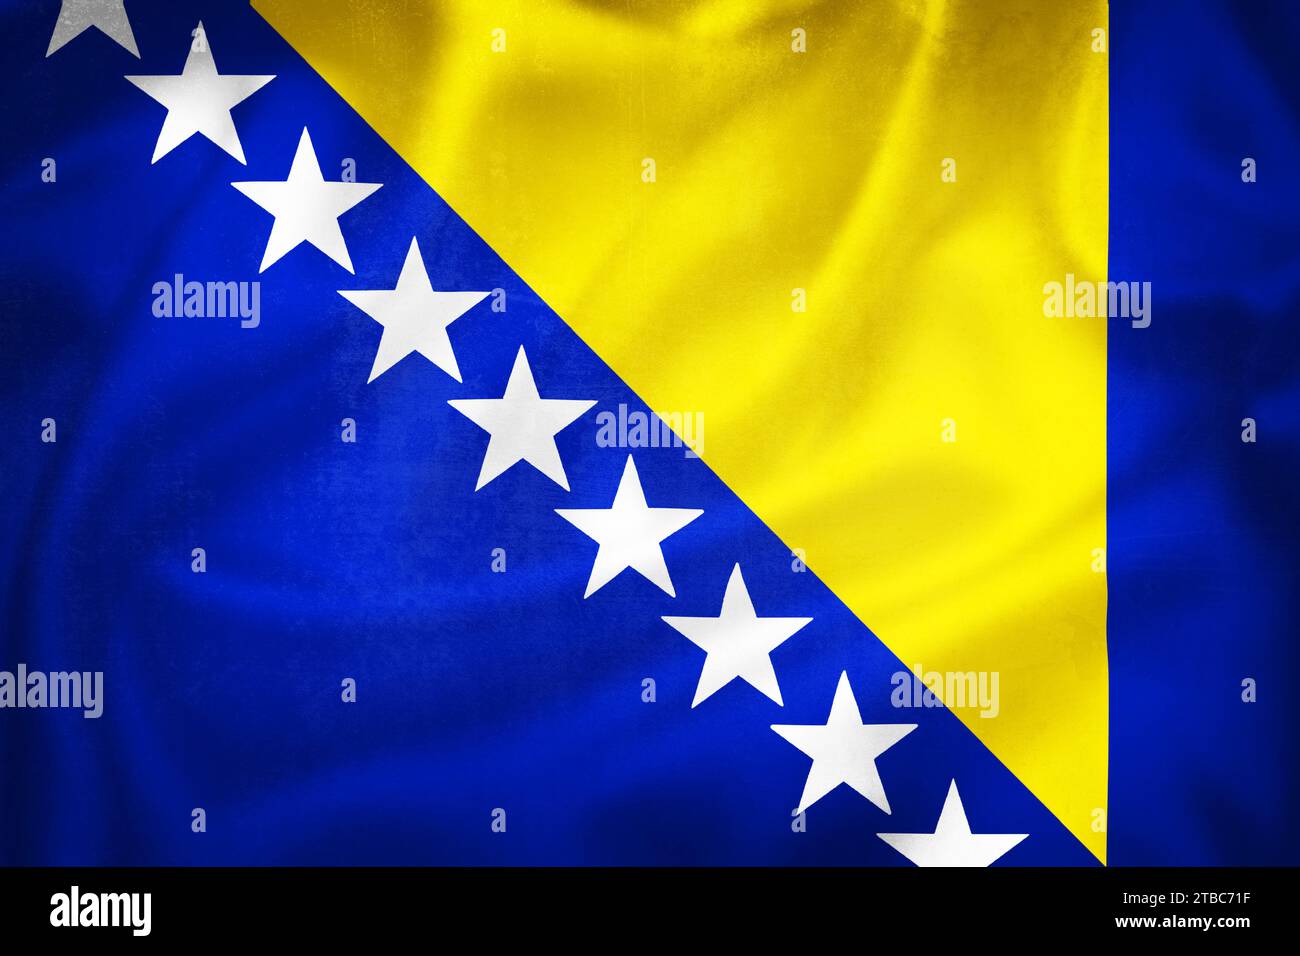 Grunge 3D illustration of Bosnia and Herzegovina  flag, concept of Bosnia and Herzegovina Stock Photo